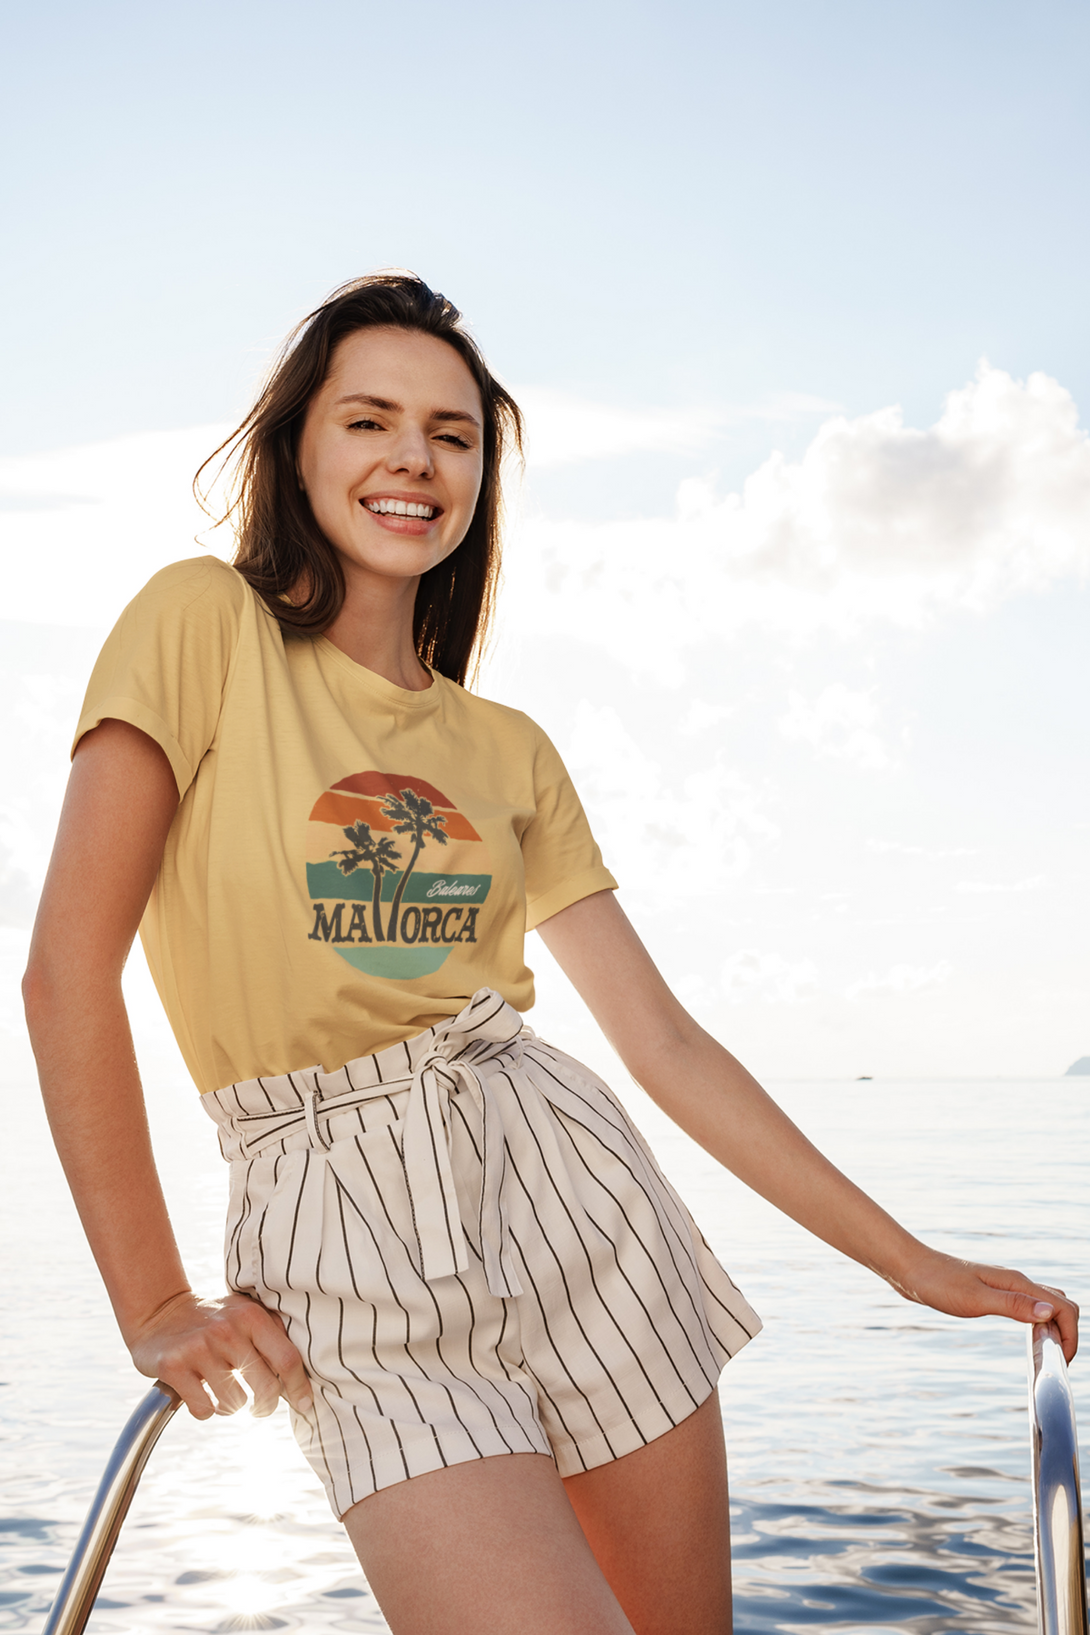 Mallorca And Palm Printed T-Shirt For Women - WowWaves - 6